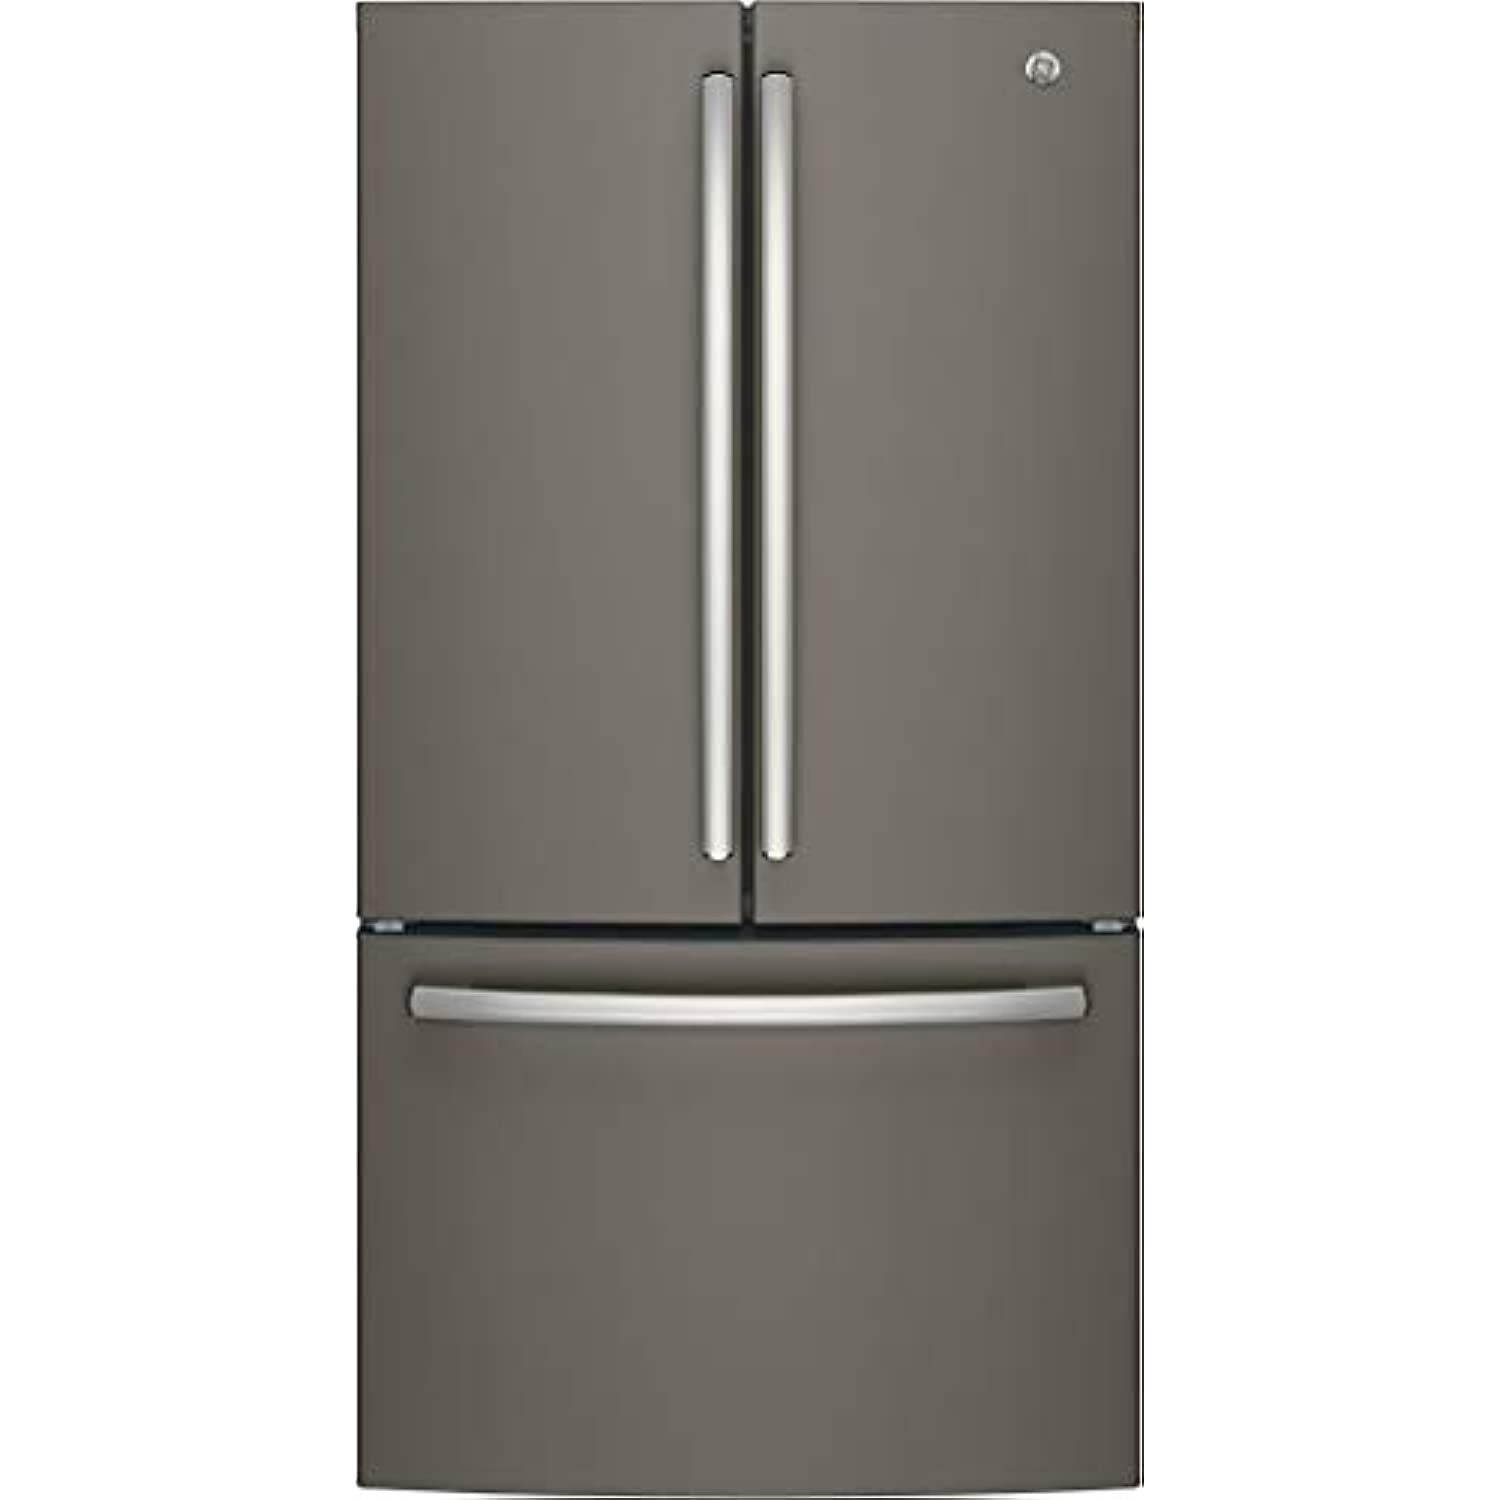 GE GNE27JMMES 36 French Door Refrigerator with 27 cu. ft. Total Capacity in Slate - image 1 of 5